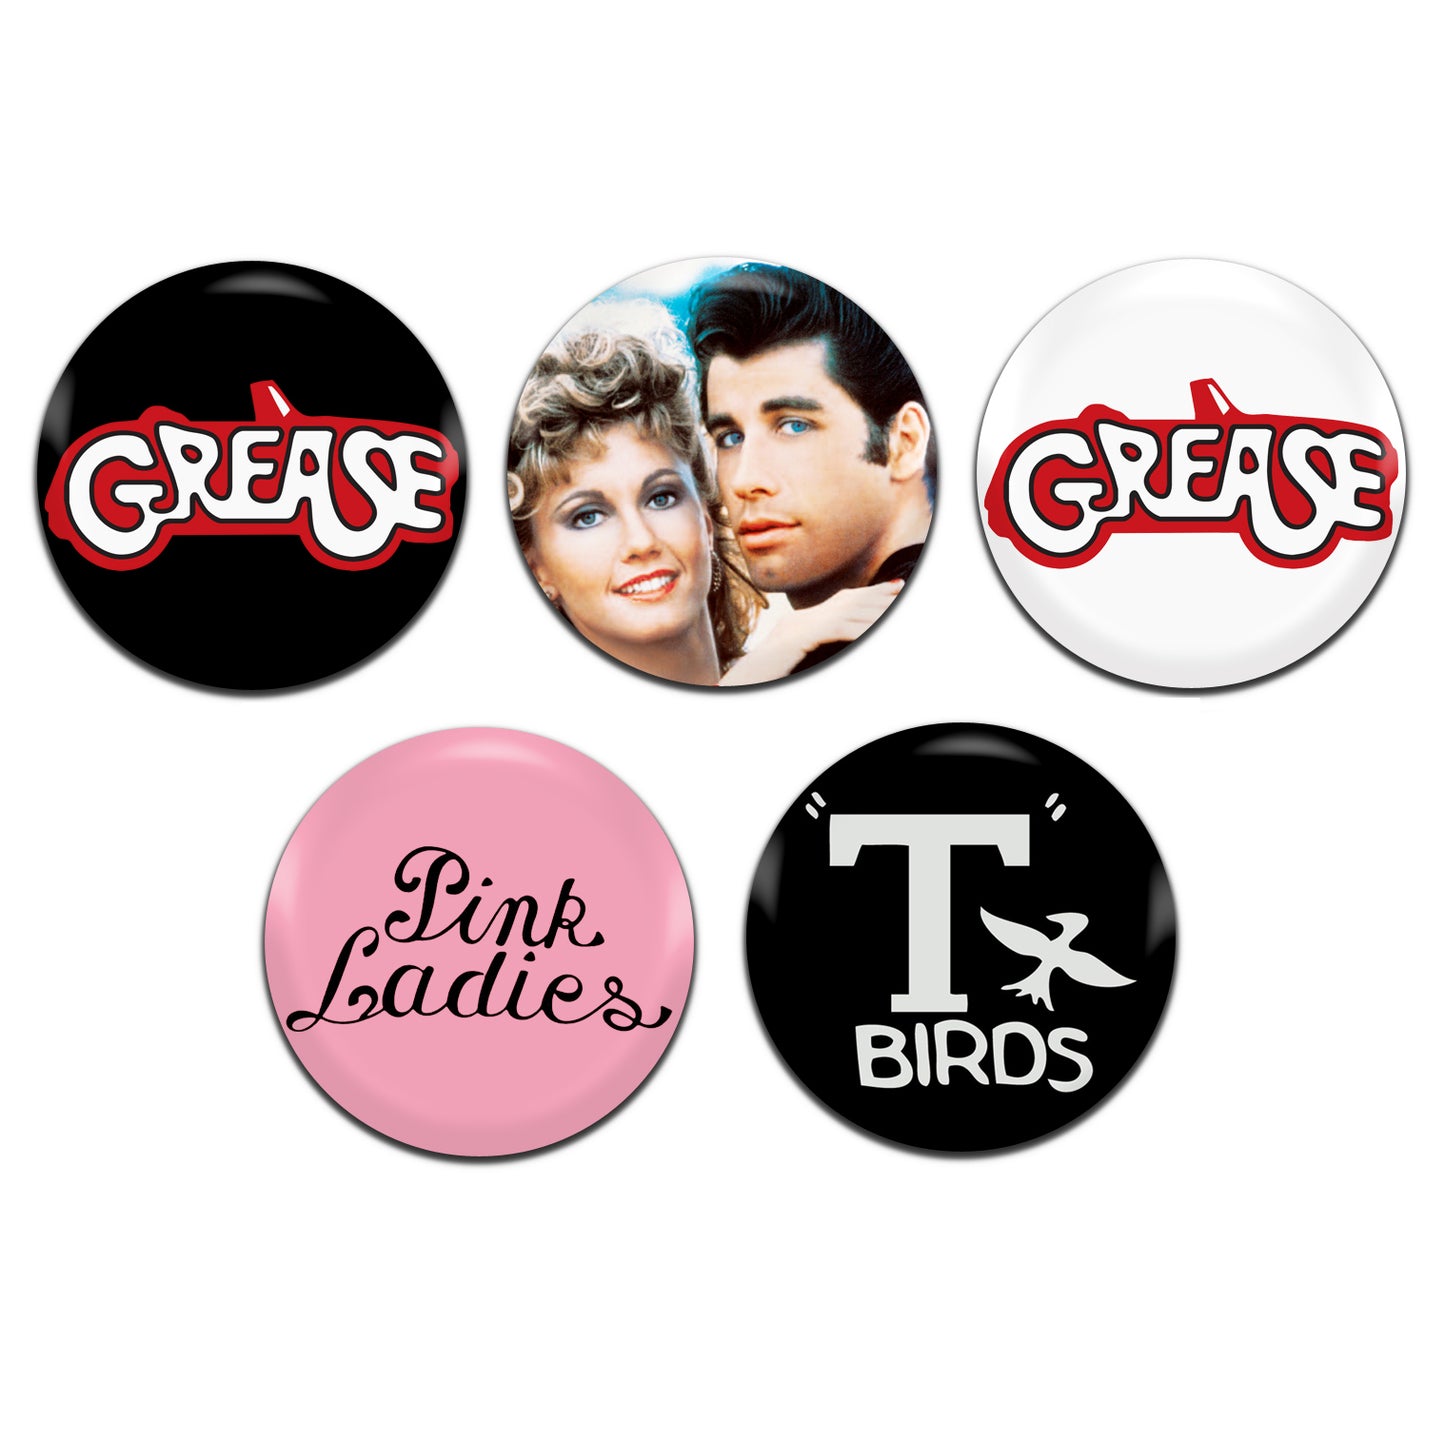 Grease Movie Musical Film 70's 25mm / 1 Inch D-Pin Button Badges (5x Set)